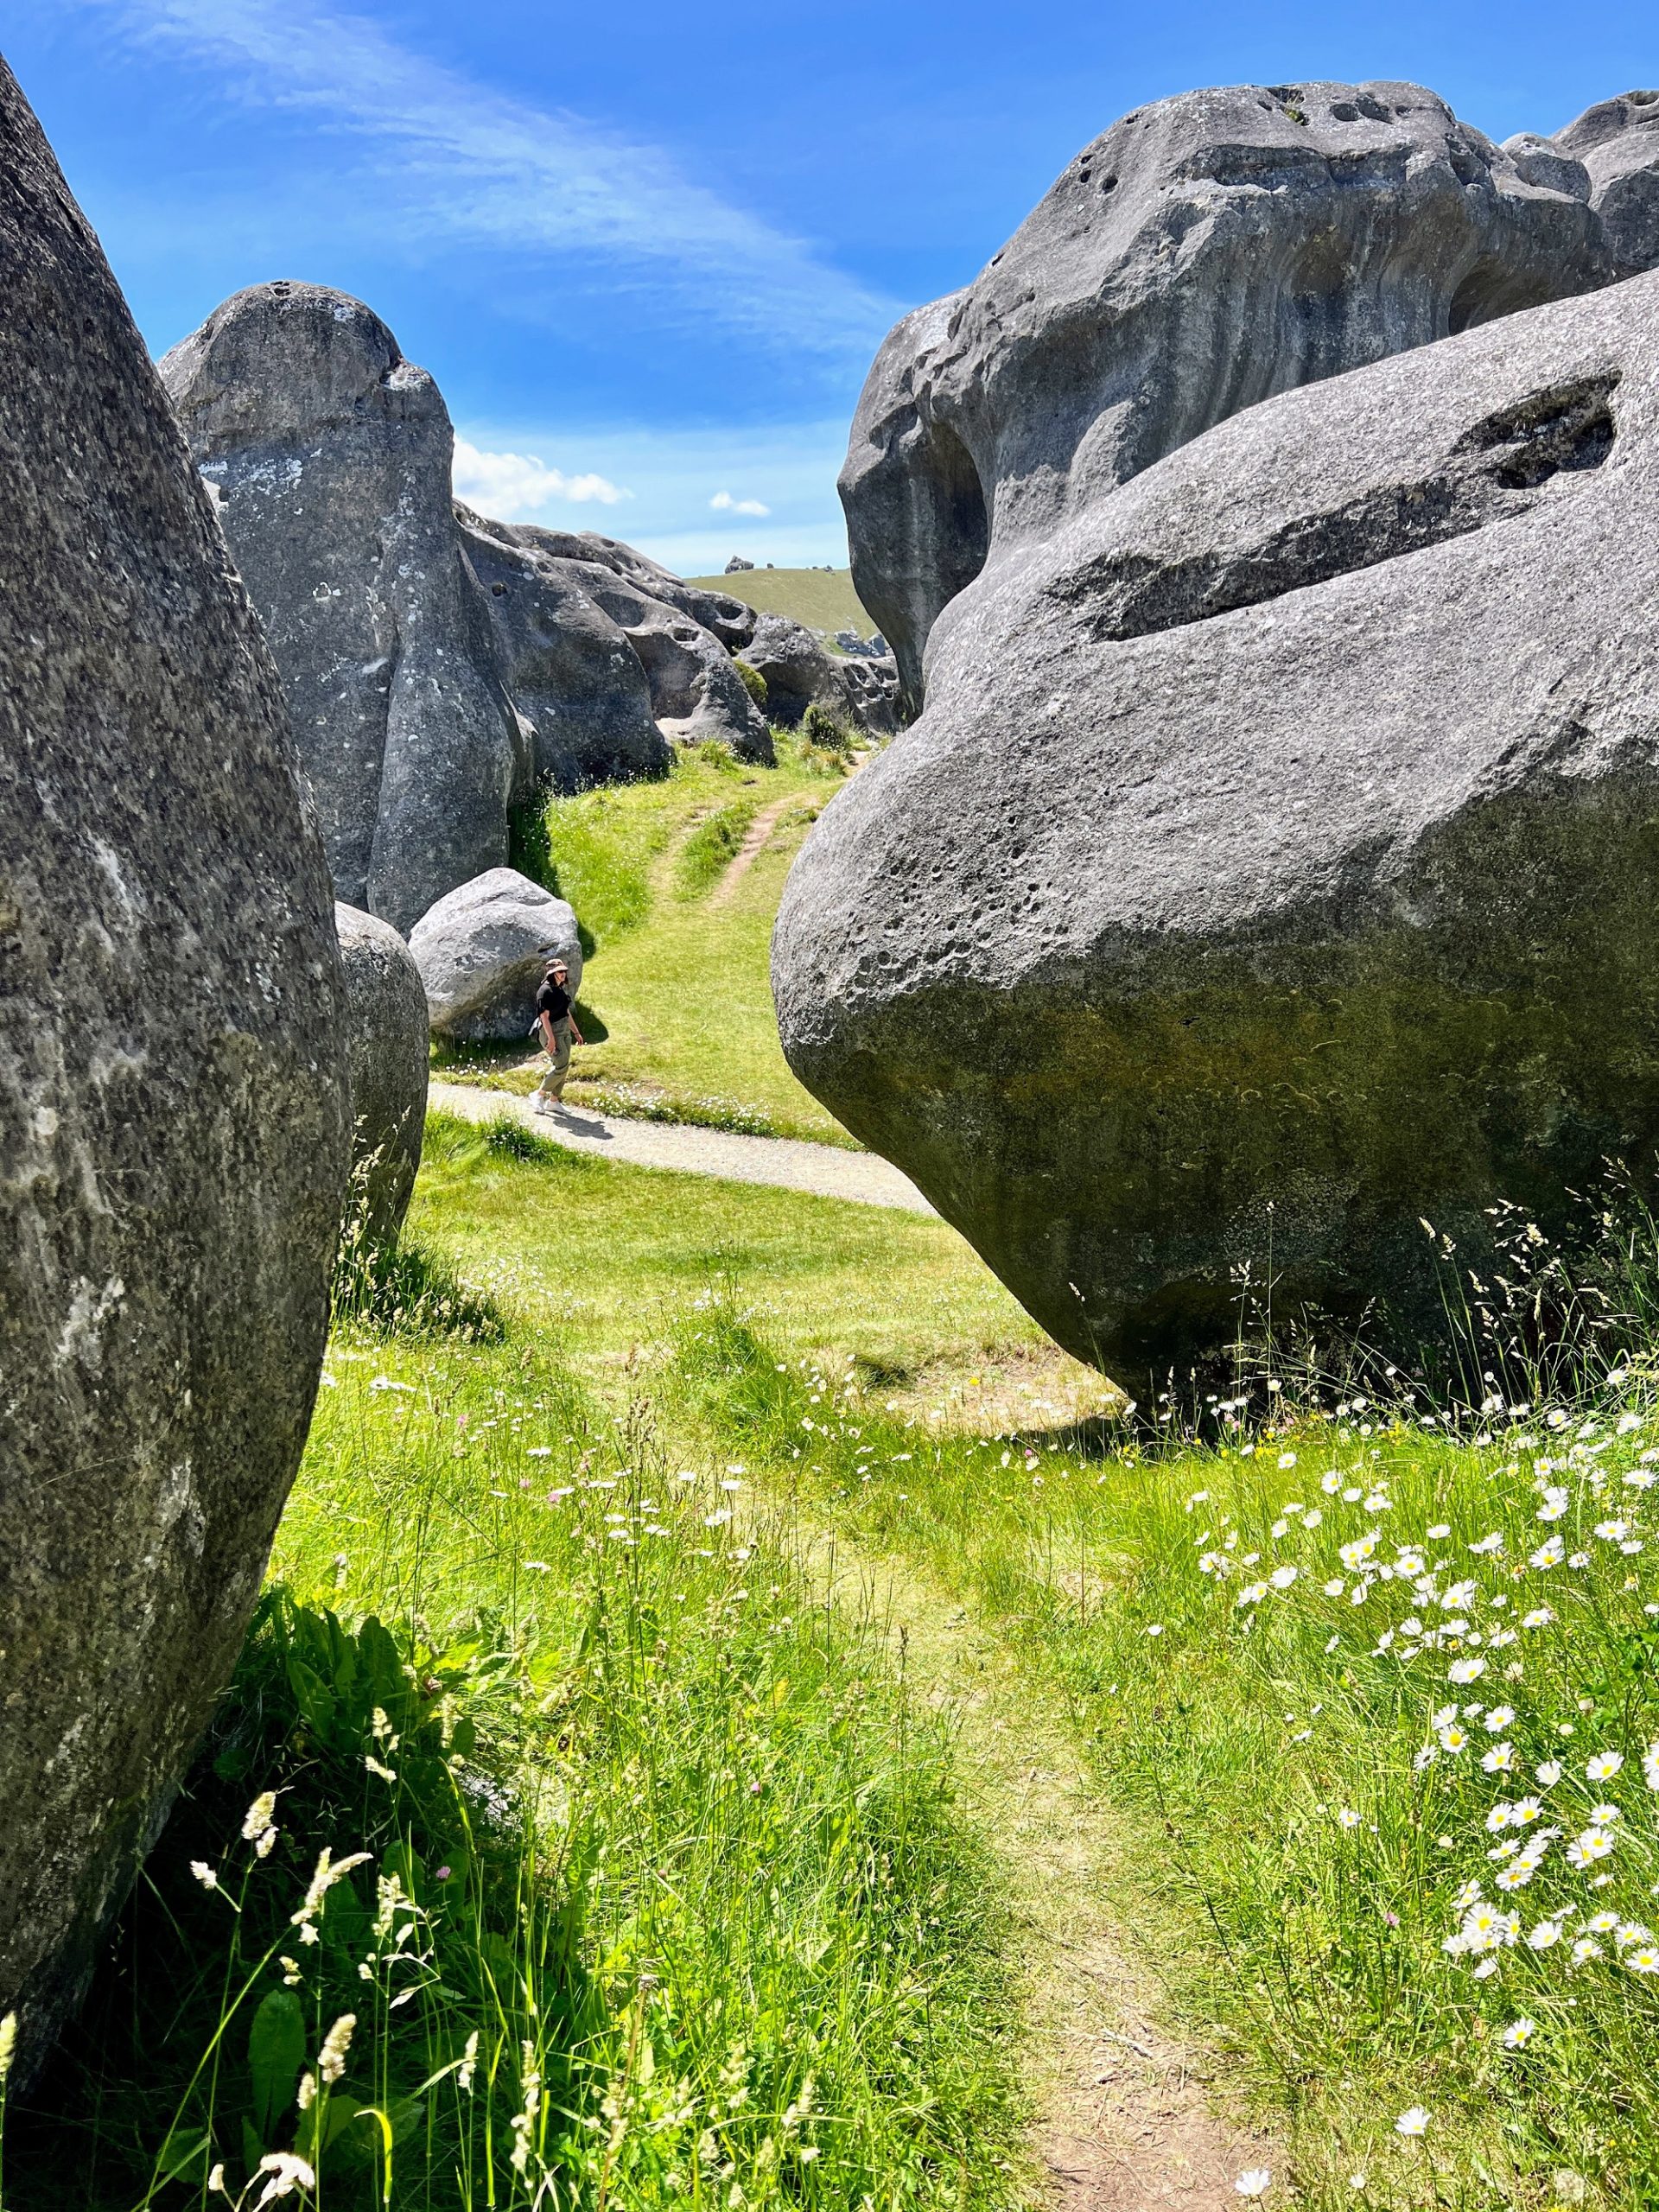 a person walking on a path through a grassy area with large rocks